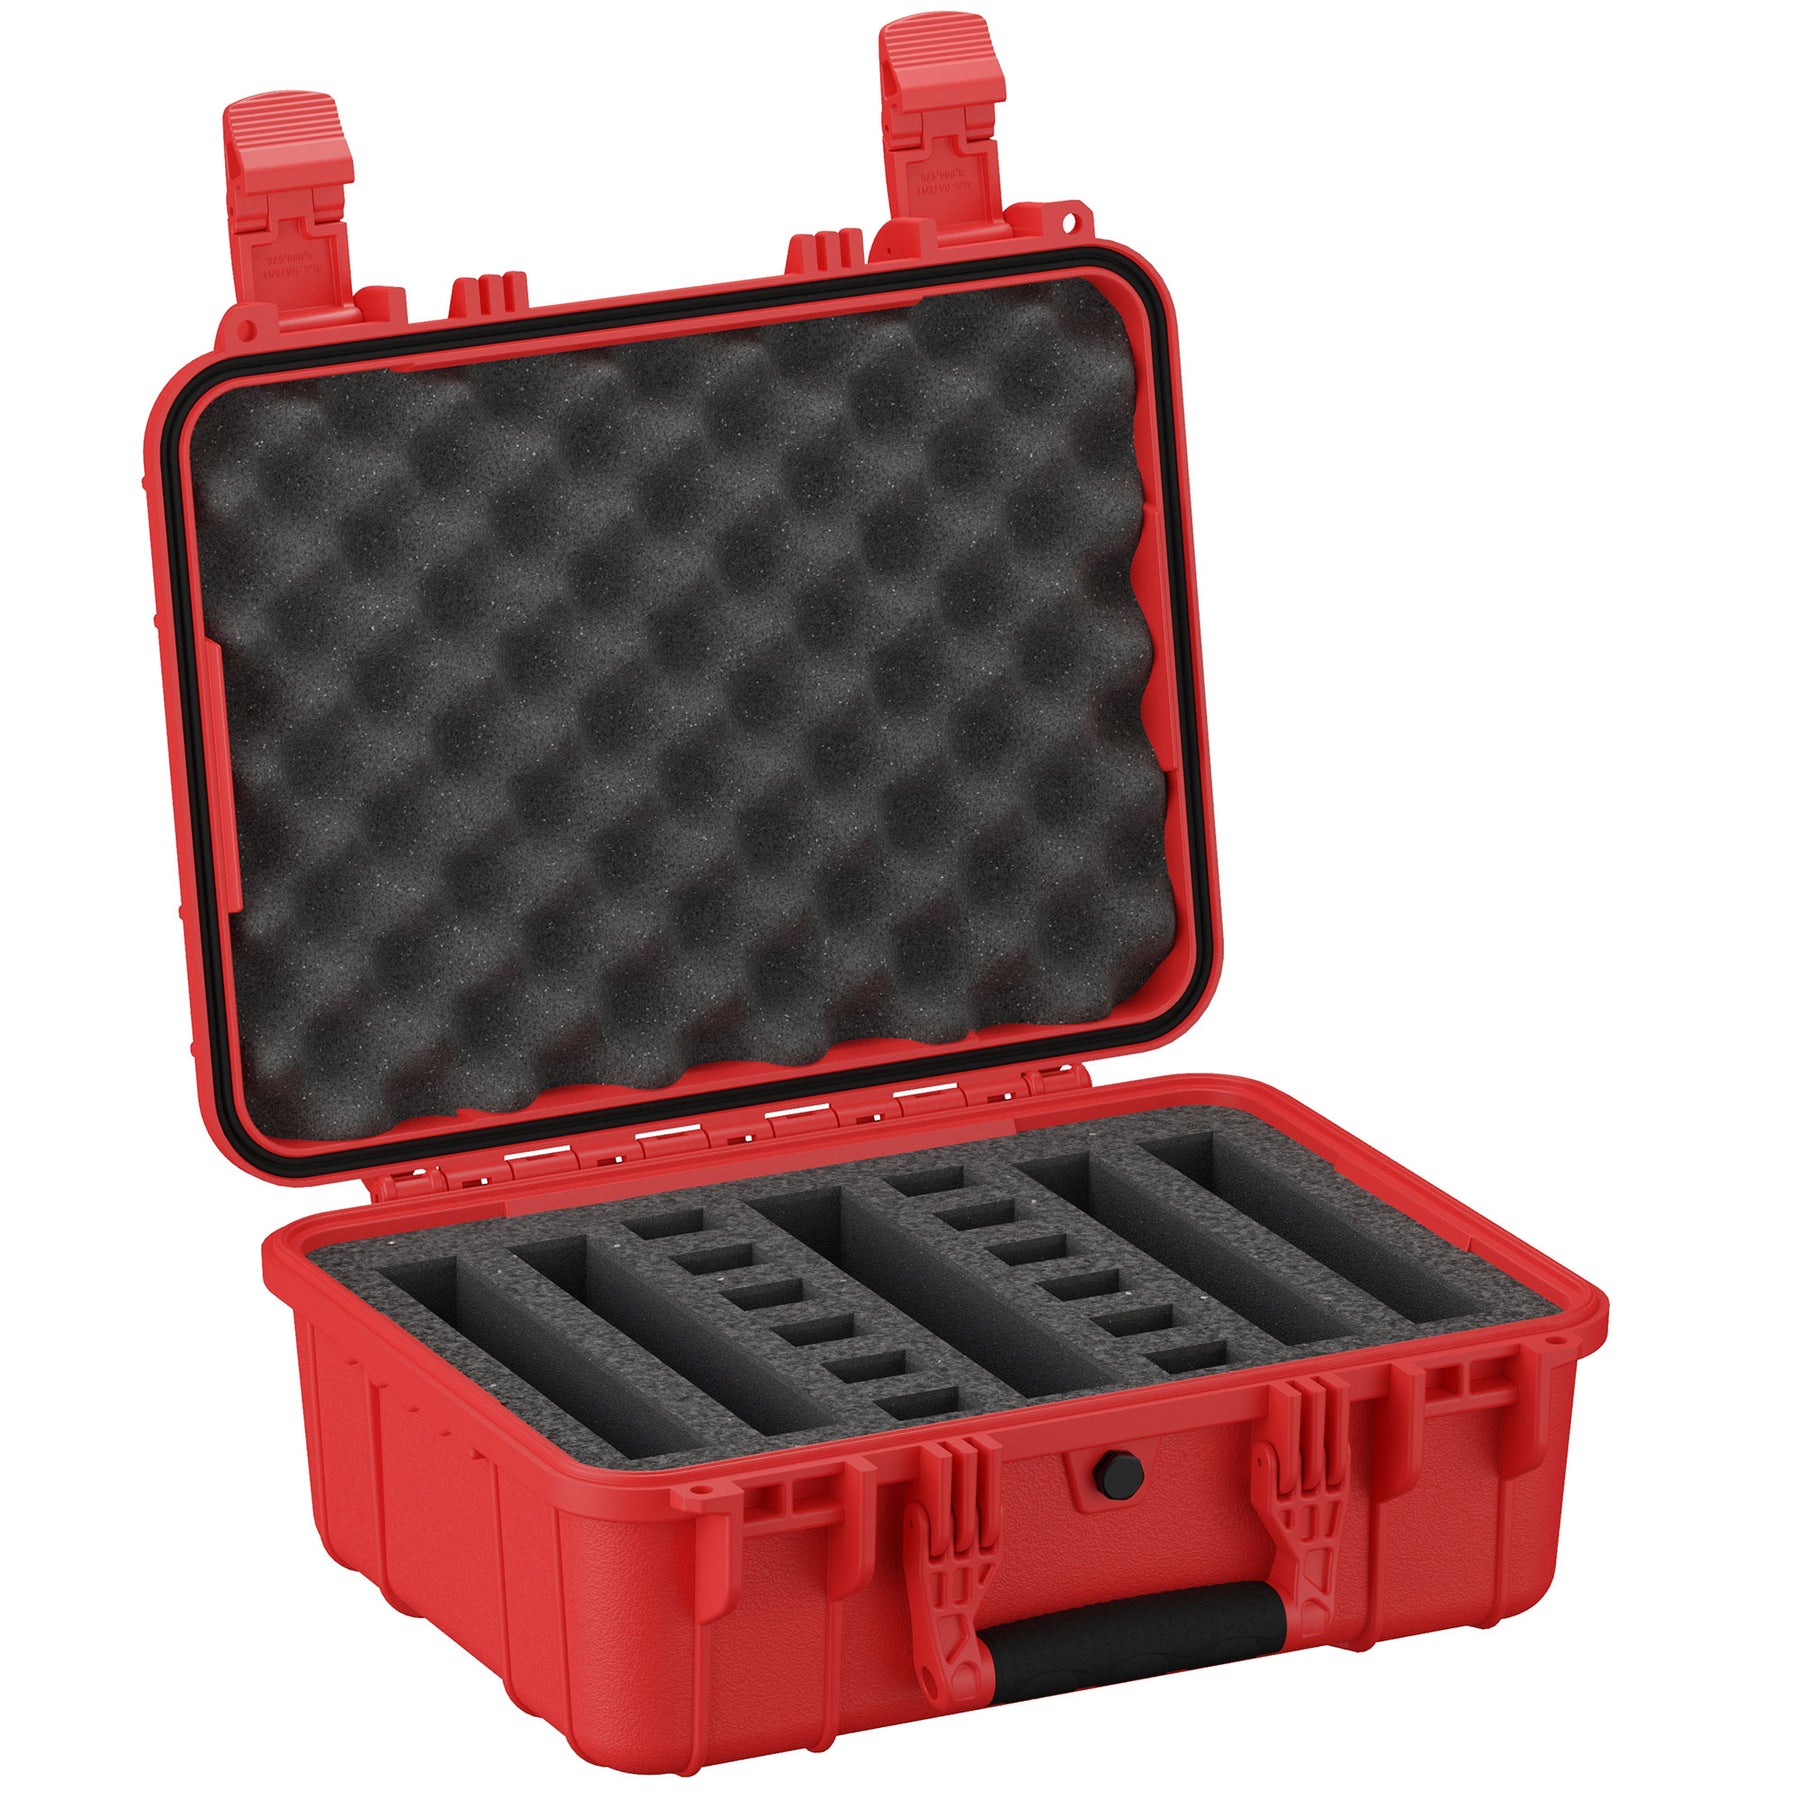 Red Yellow Hard Plastic Carrying Carry Case Storage Box with Handle Divider